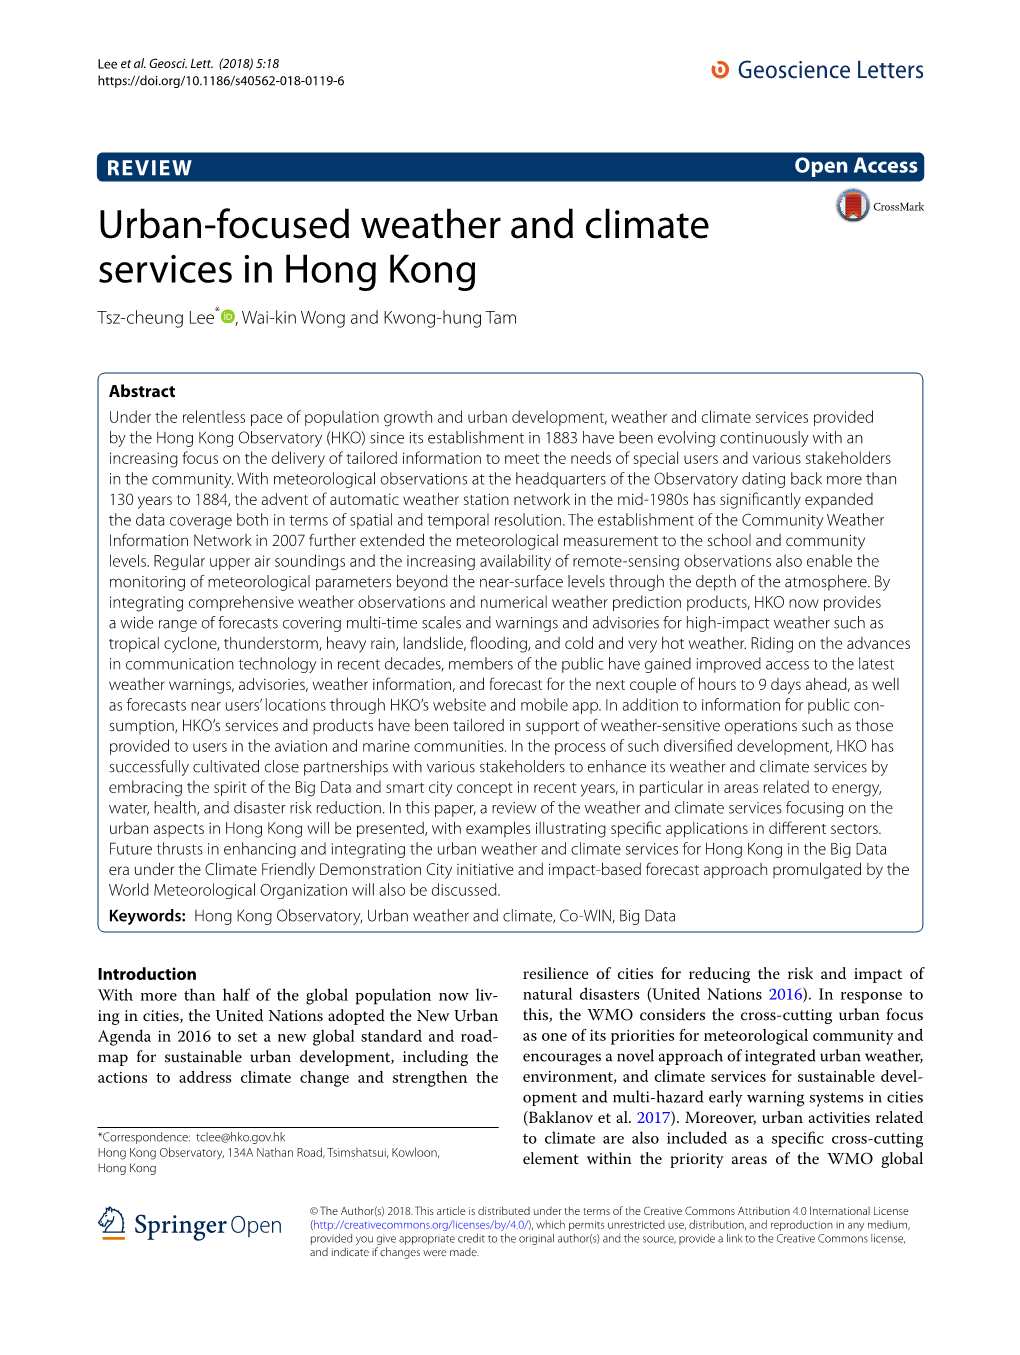 Urban-Focused Weather and Climate Services in Hong Kong